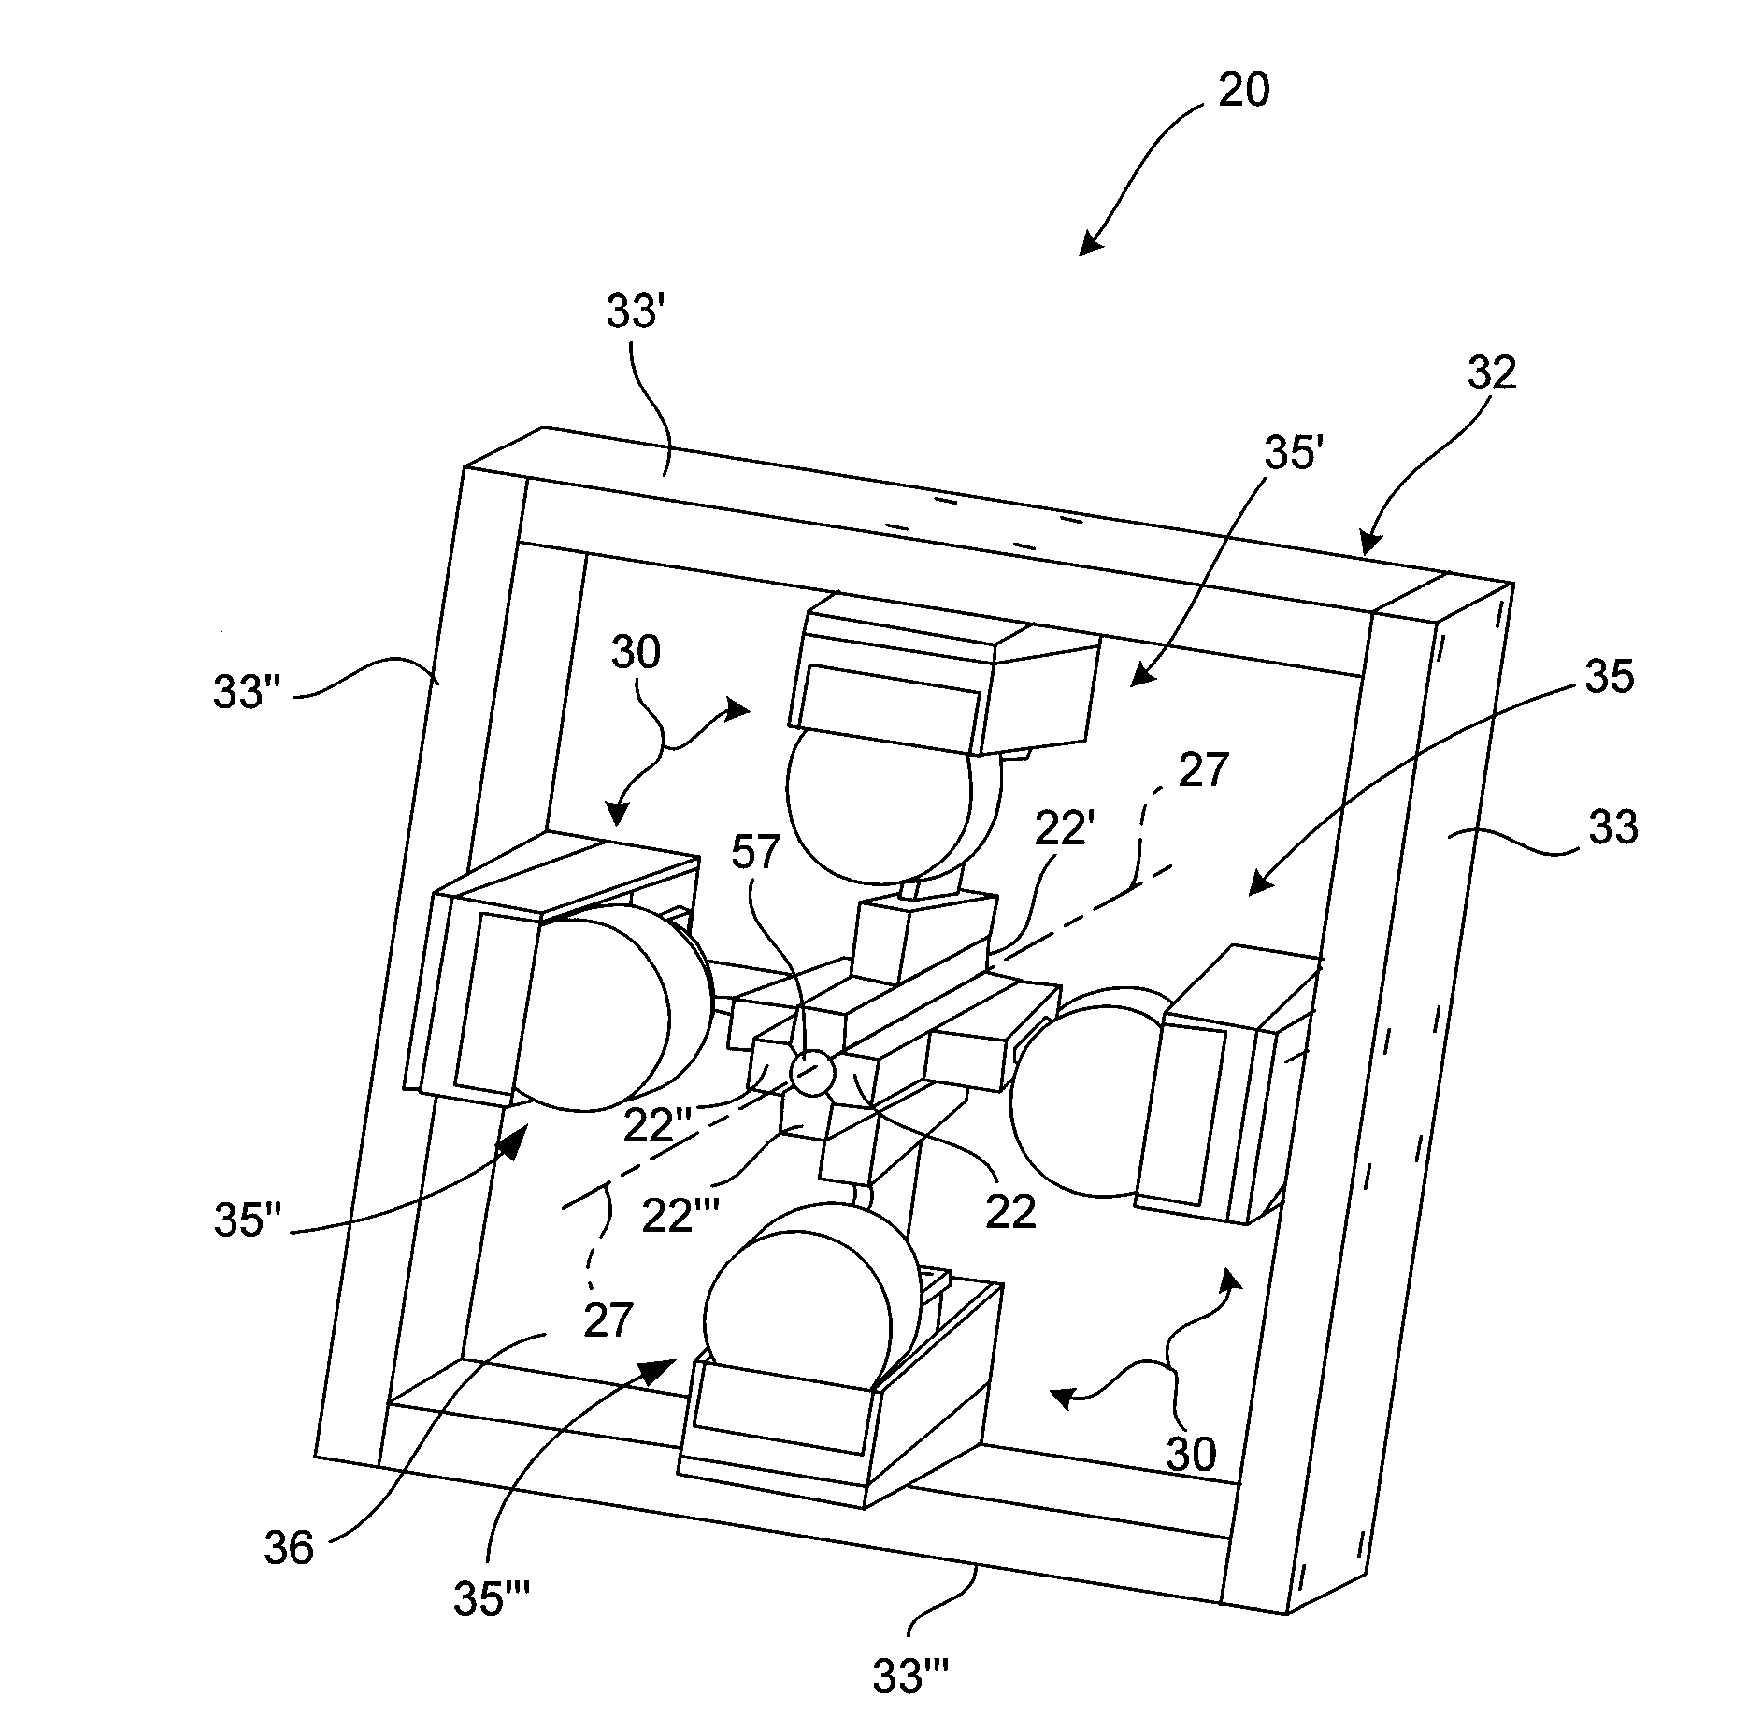 Stent crimping assembly and method